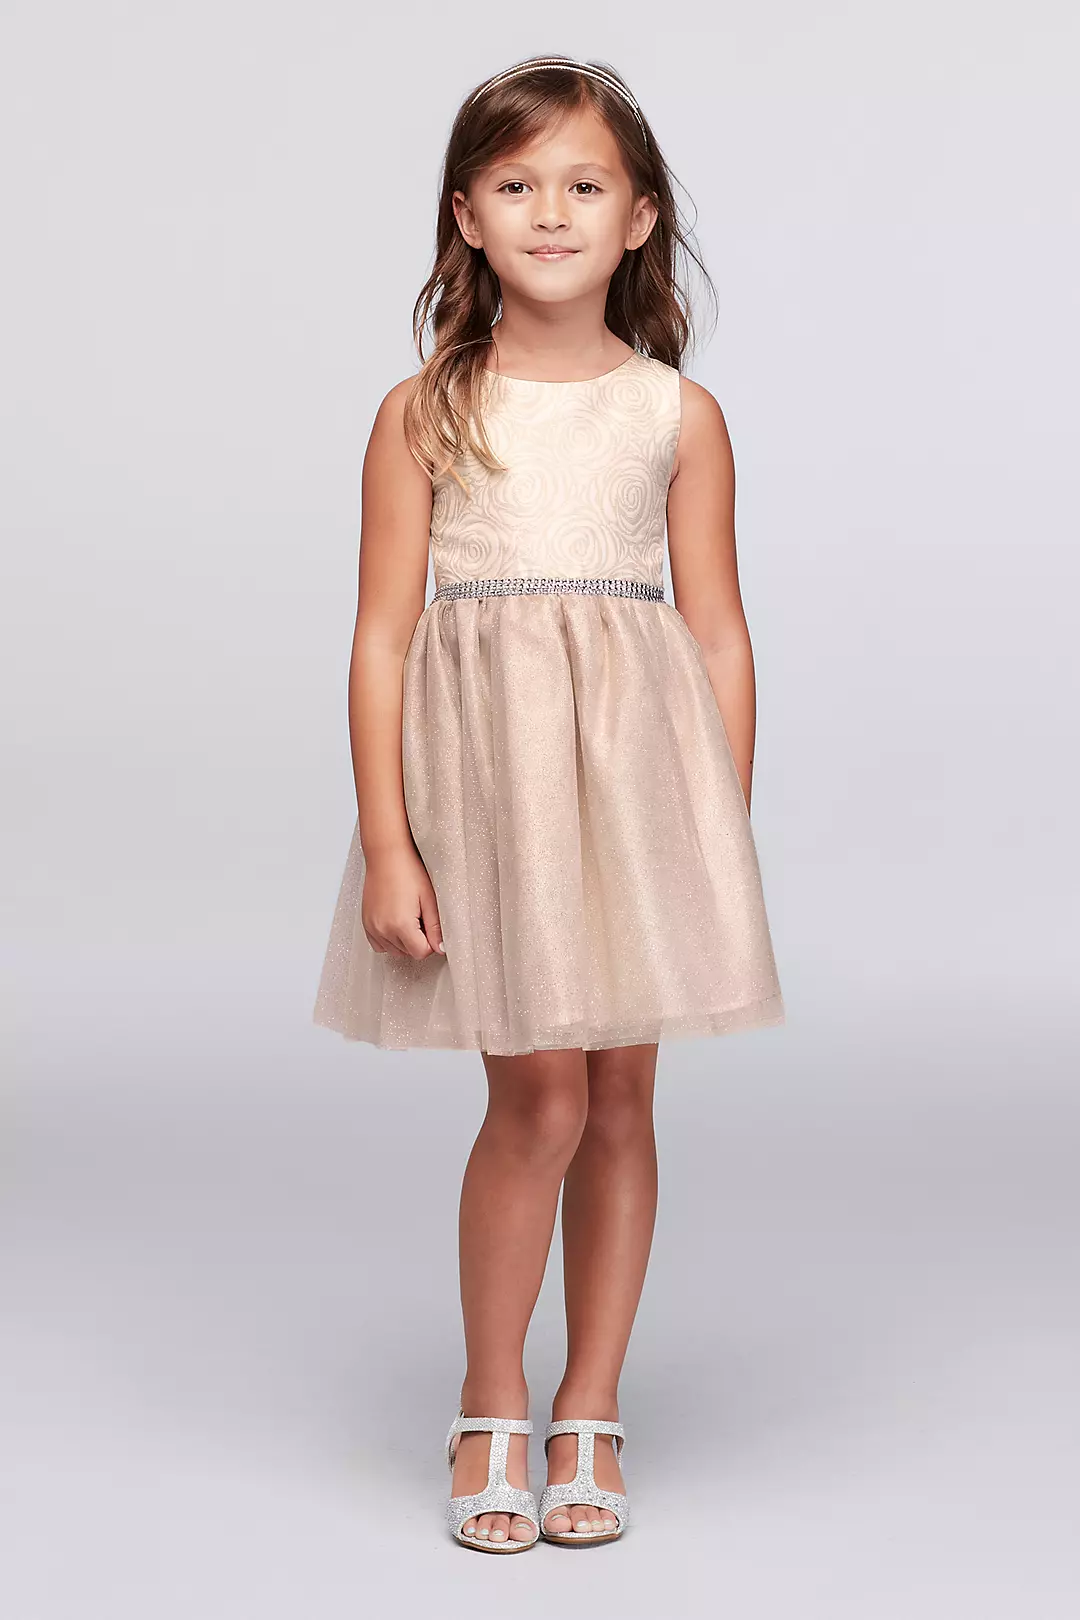 Metallic Rose and Tulle Party Dress Image